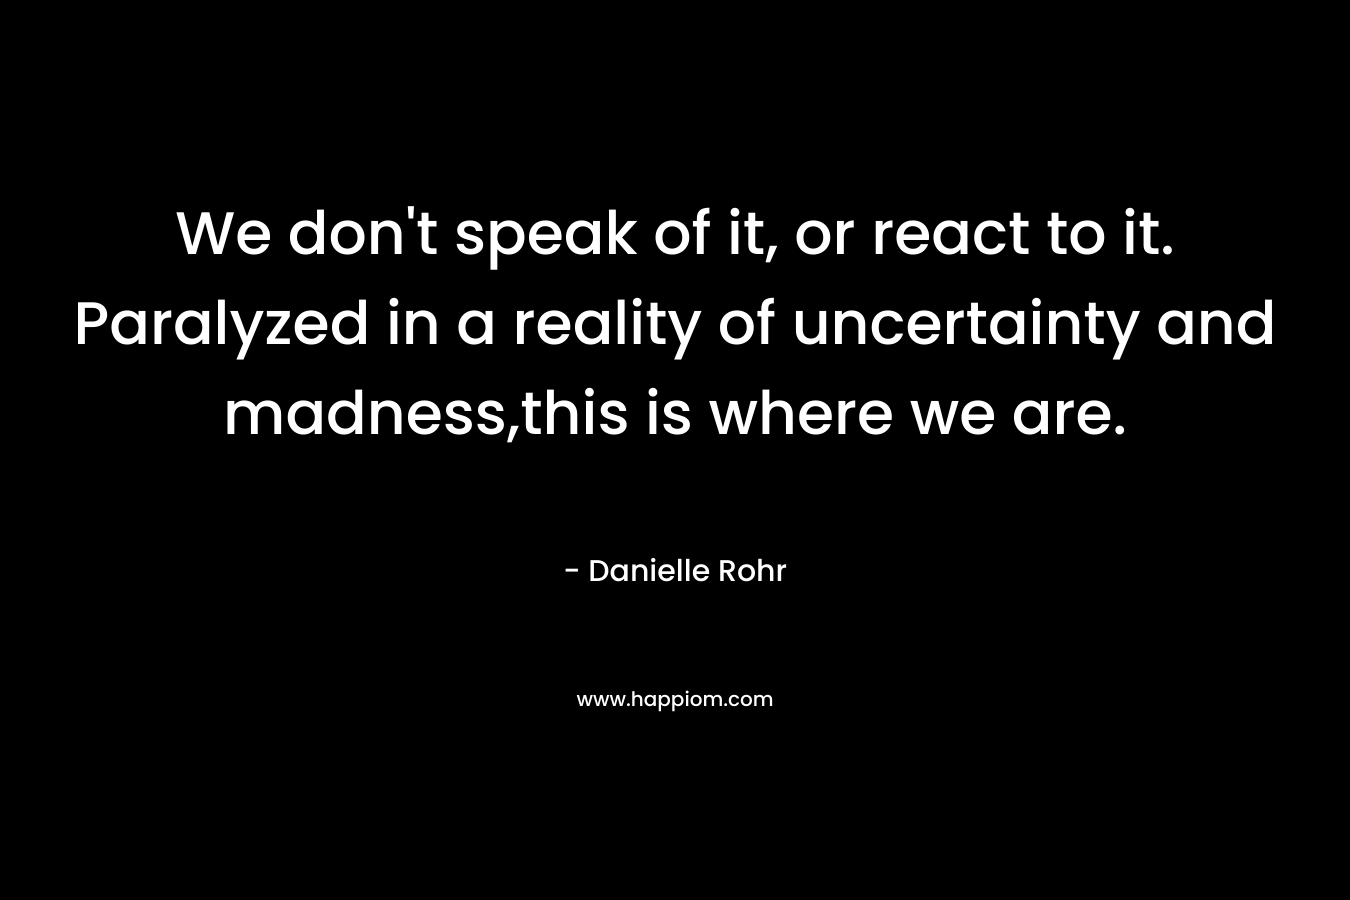 We don’t speak of it, or react to it. Paralyzed in a reality of uncertainty and madness,this is where we are. – Danielle Rohr